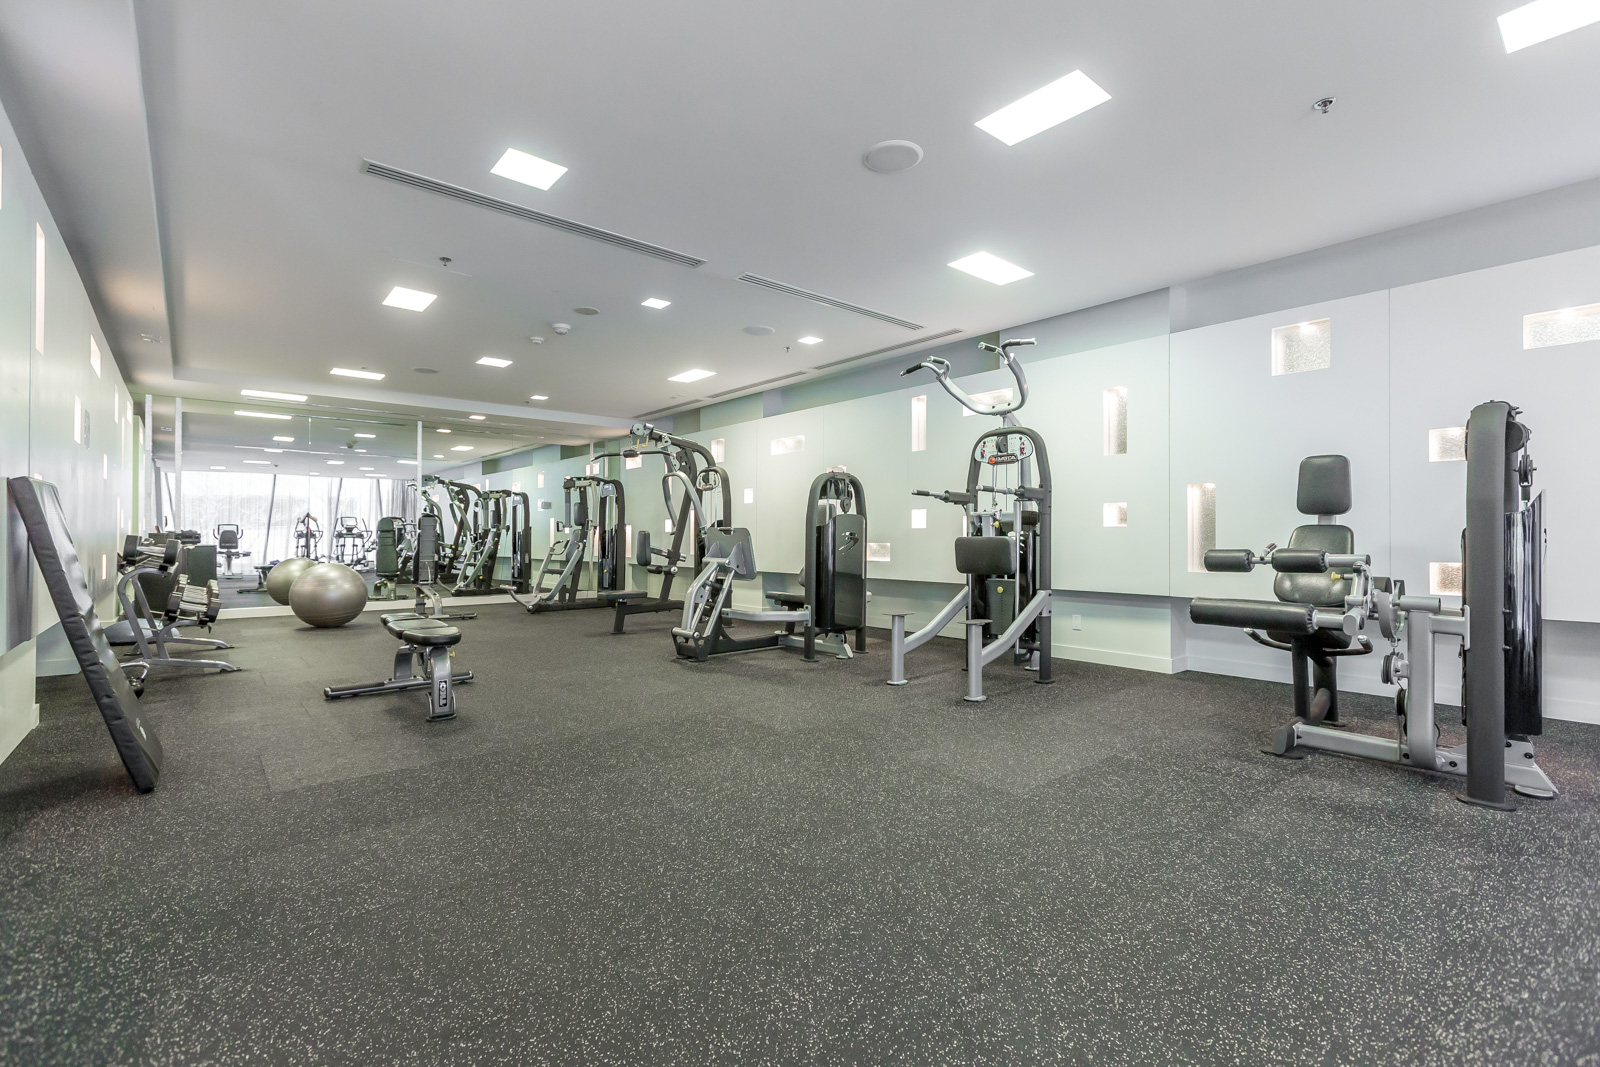 The Couture Condos gym and equipment